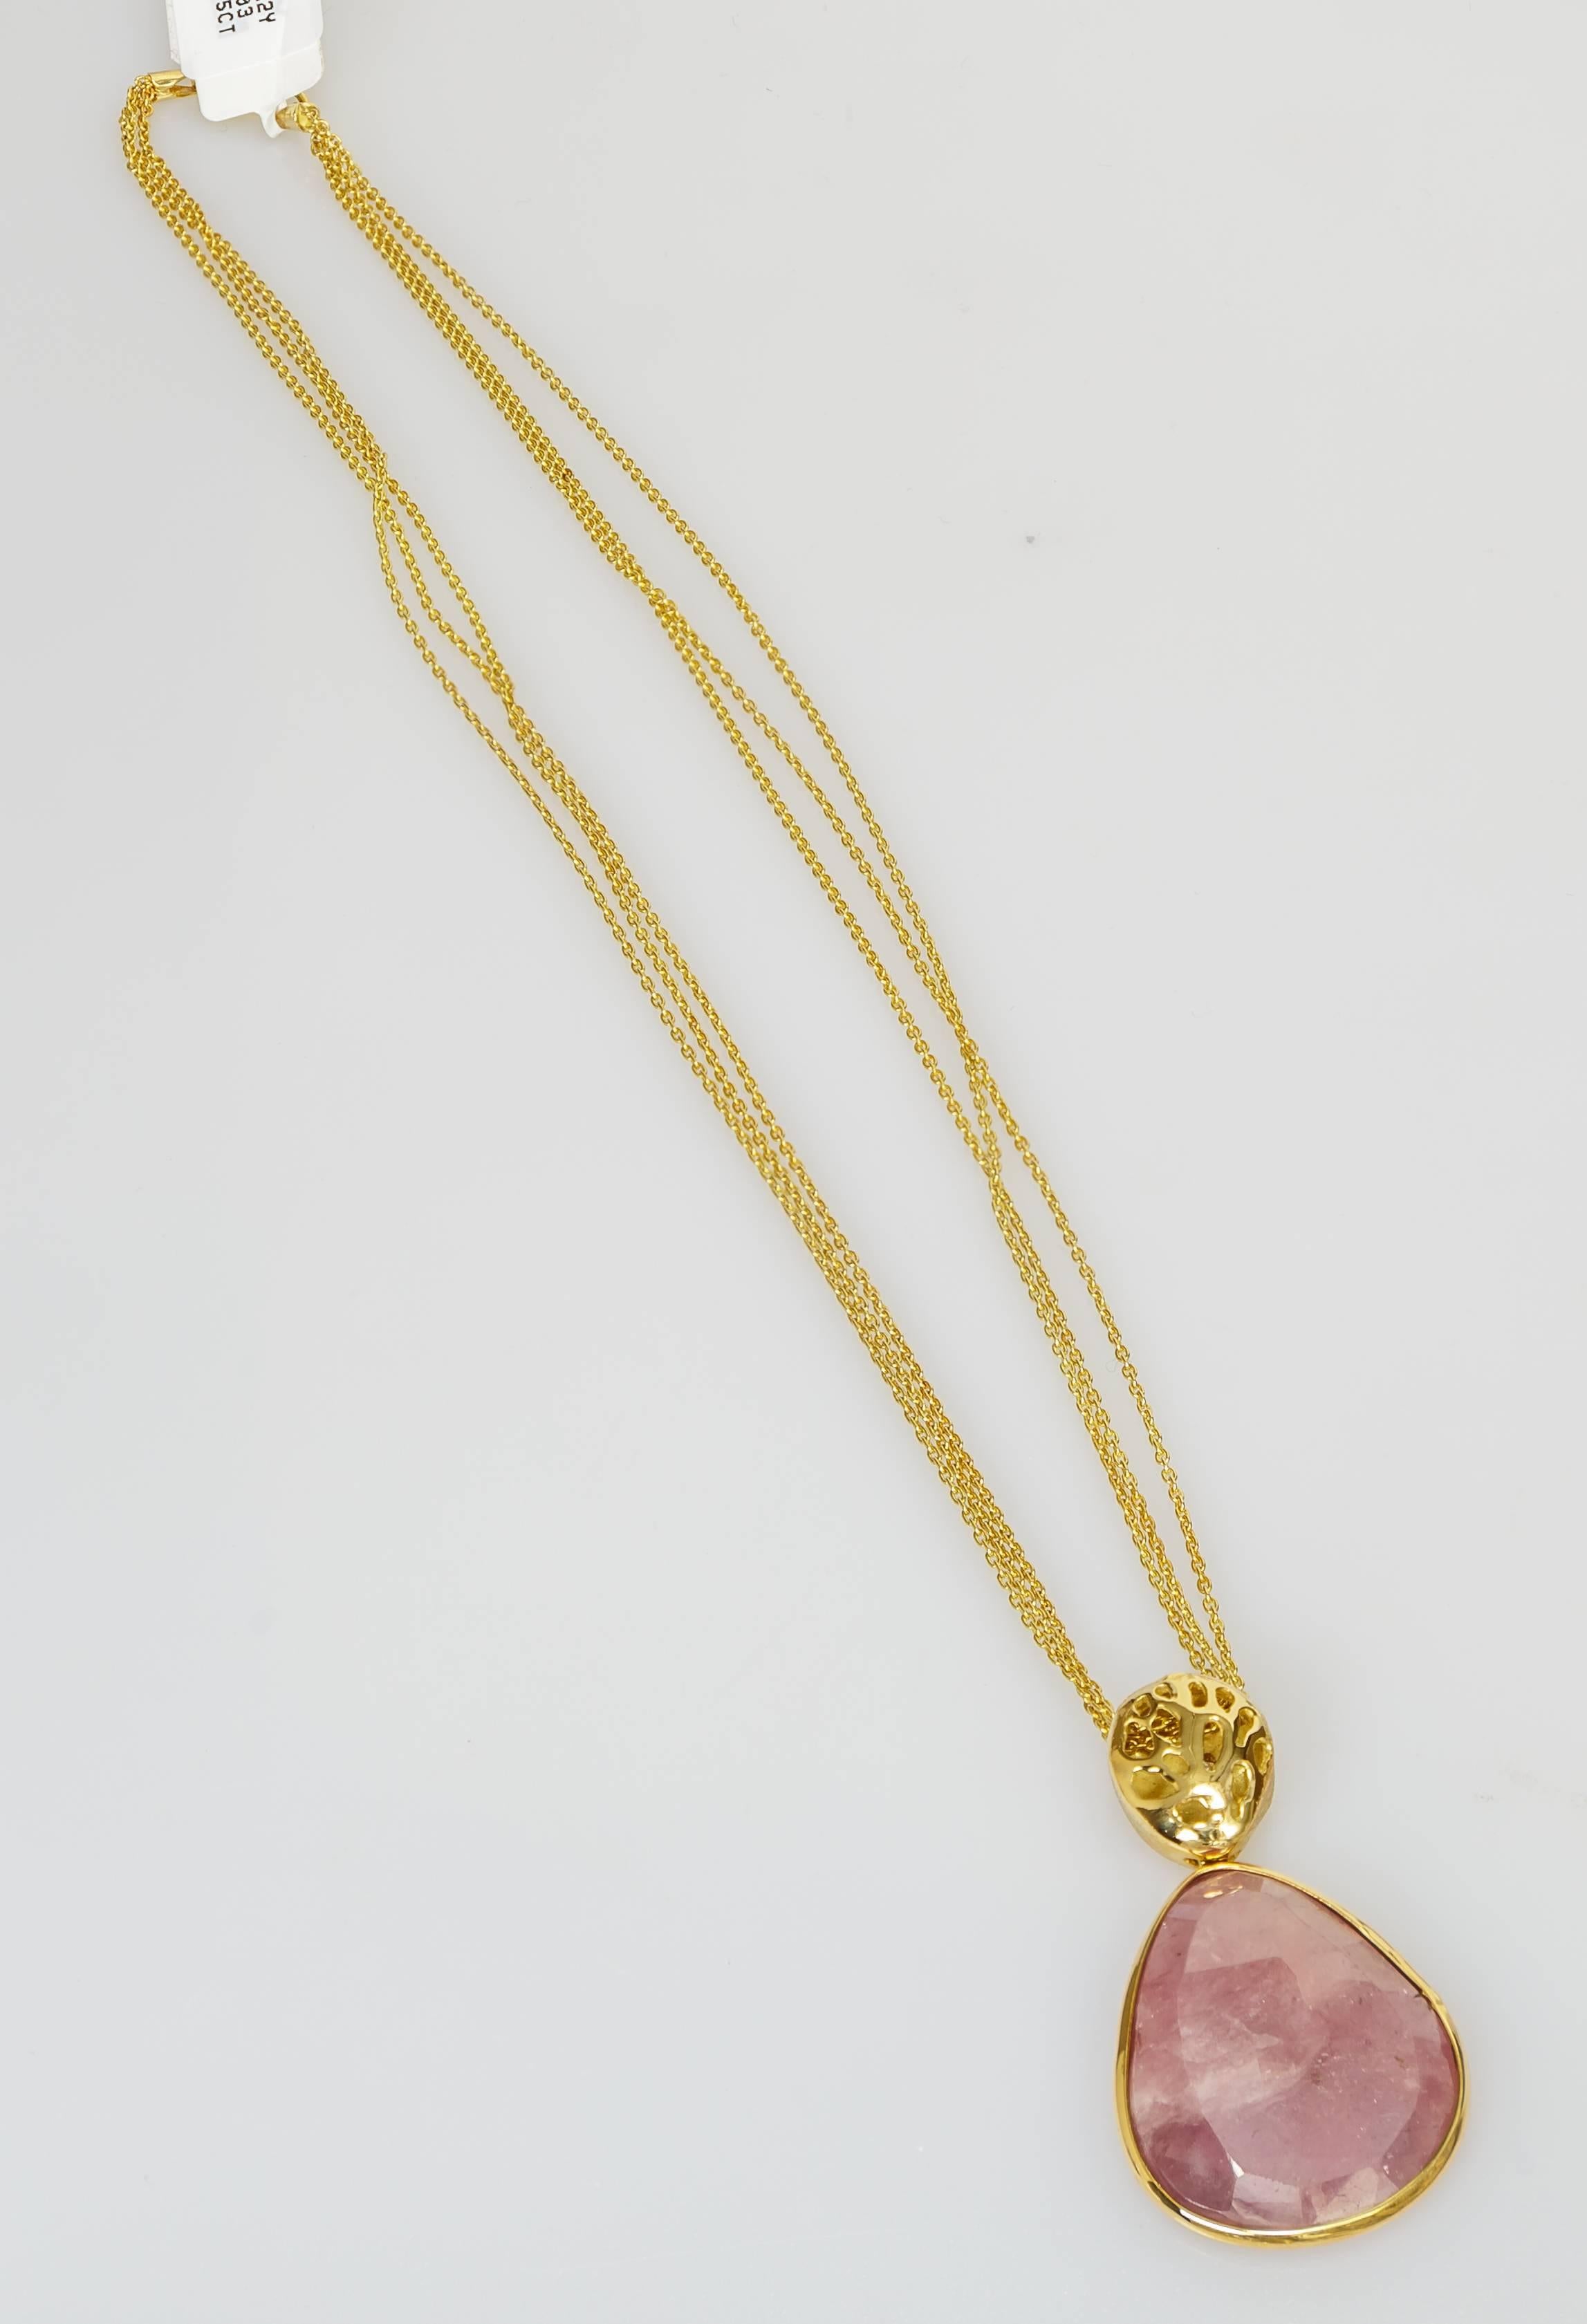 This Yvel pendant necklace features a 29.50 ct. natural colored dark pink sapphire and 18k yellow gold pendant set on an 18k yellow gold chain.  The chain measures 17 inches long.